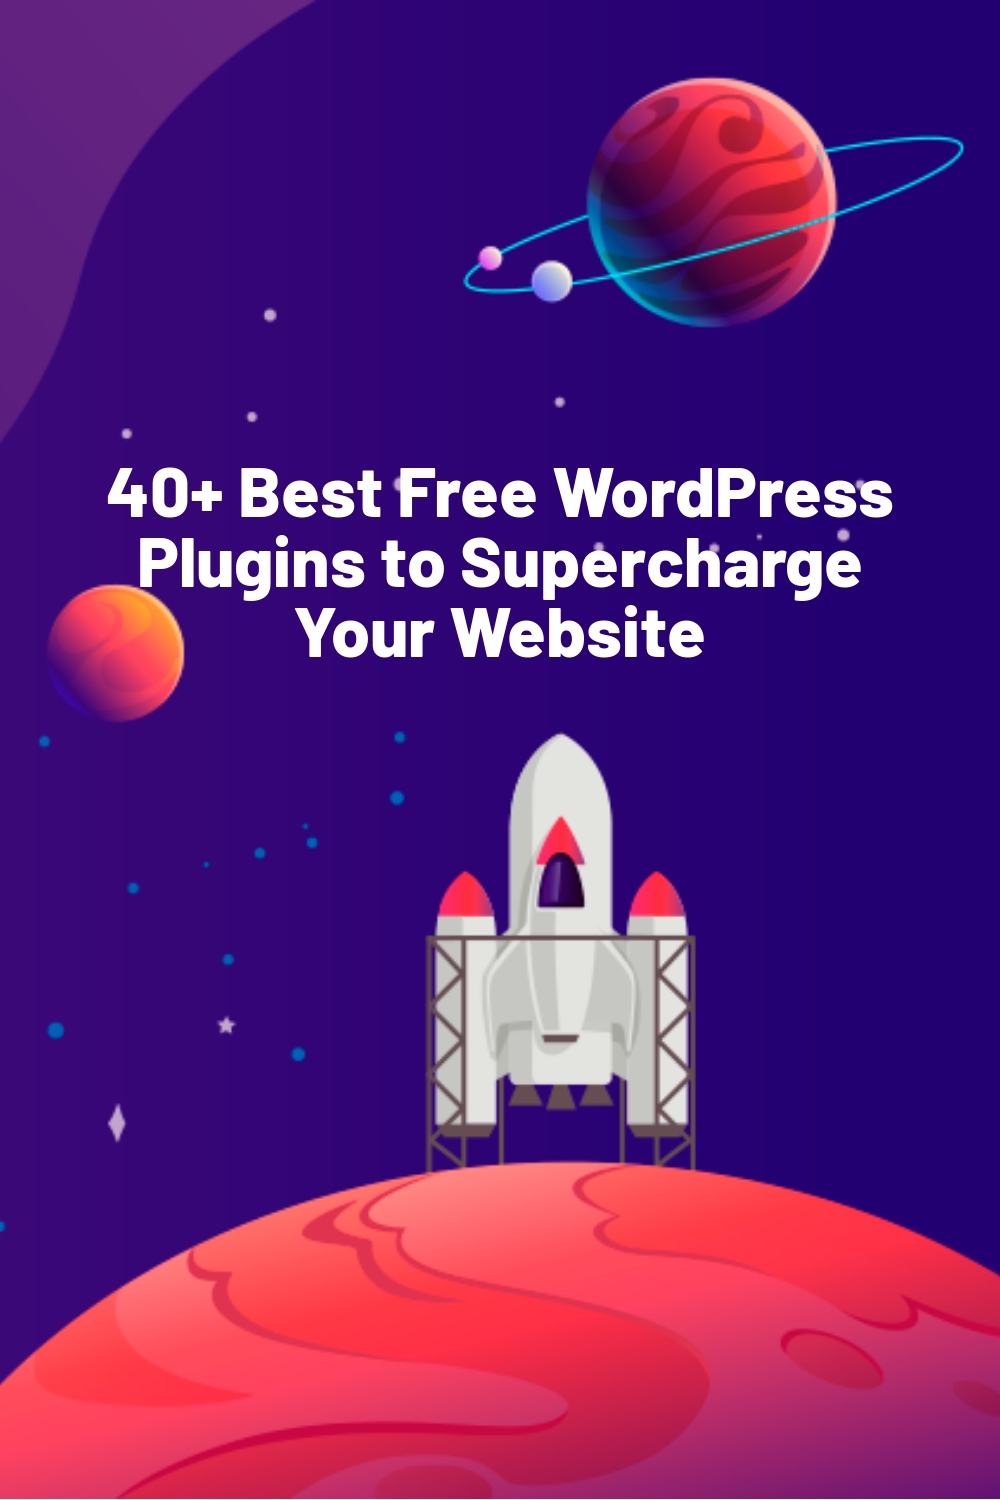 40+ Best Free WordPress Plugins to Supercharge Your Website